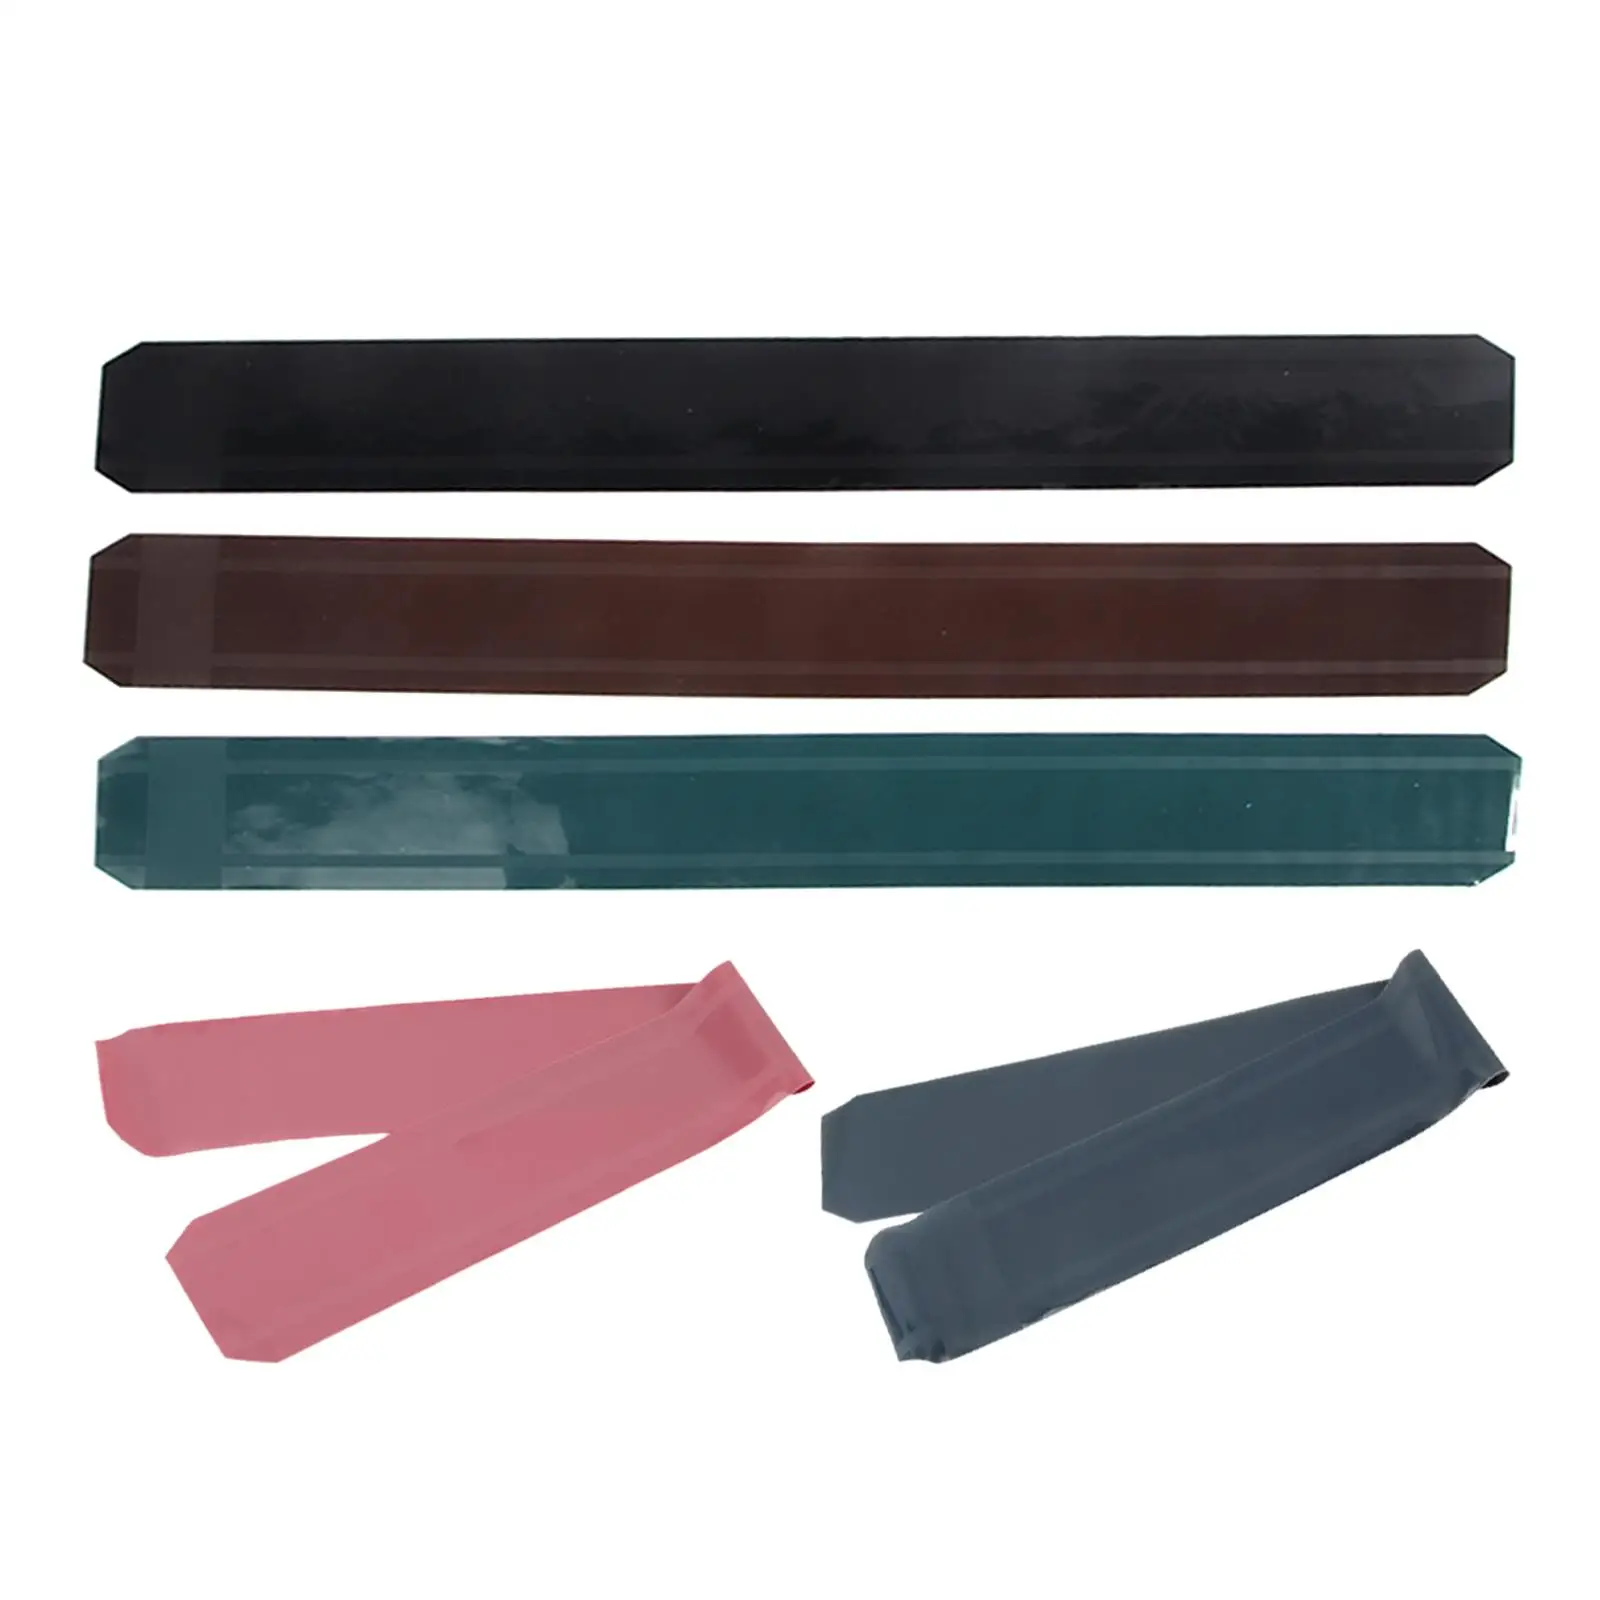 5x Hair Cutting Strips Haircut Neck Wrap Washable Waterproof Silicone Barber Neck Strips